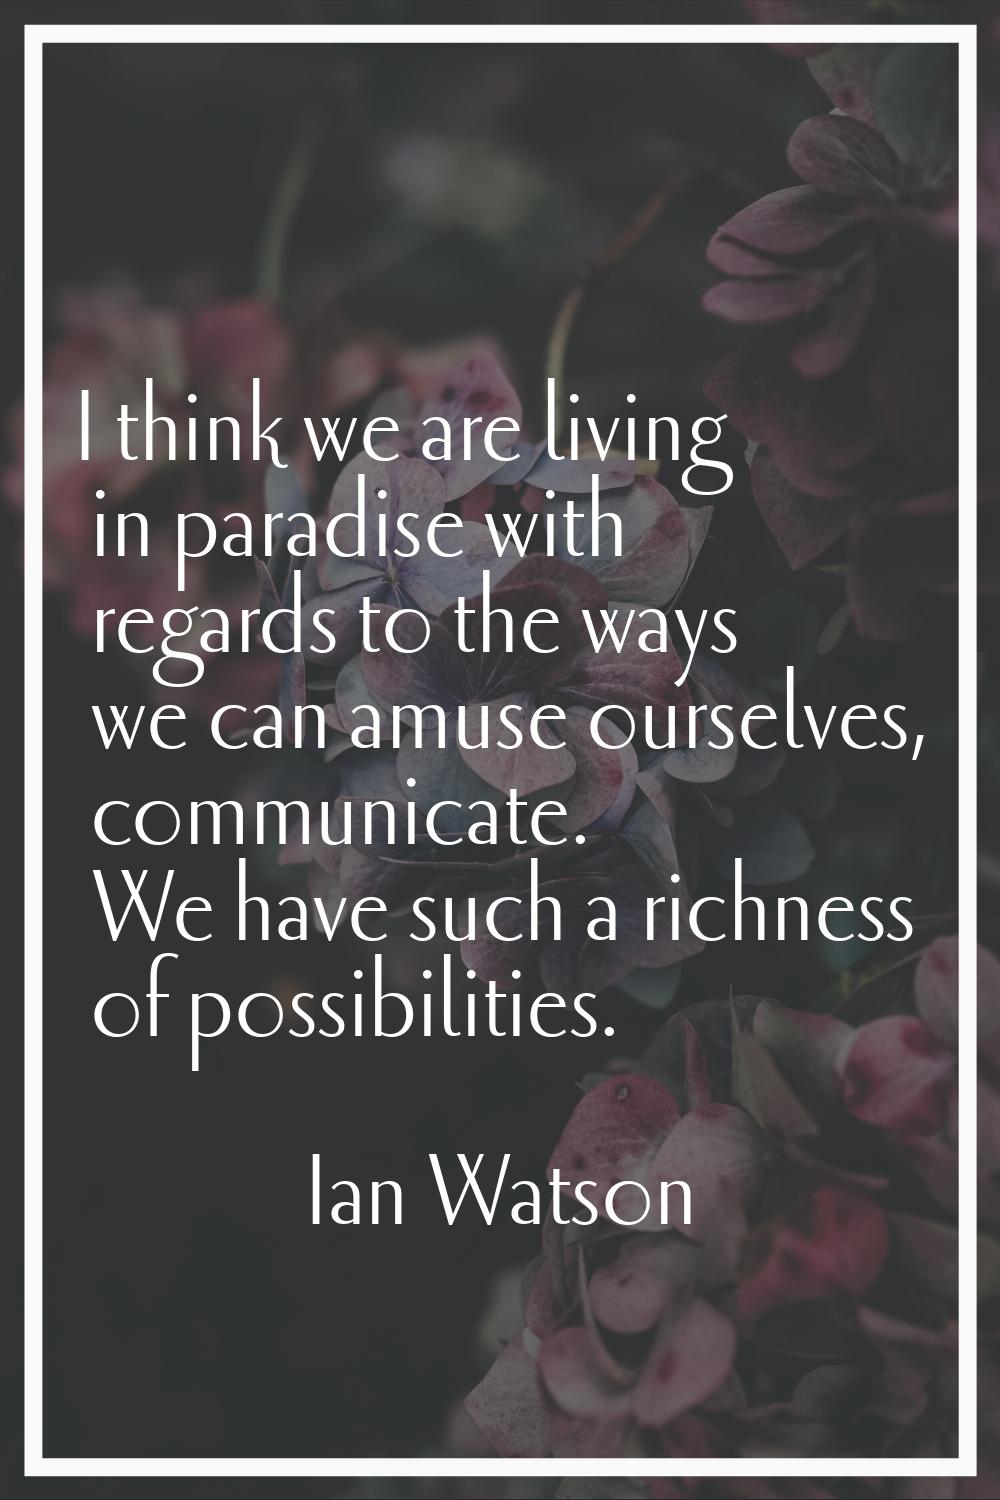 I think we are living in paradise with regards to the ways we can amuse ourselves, communicate. We 